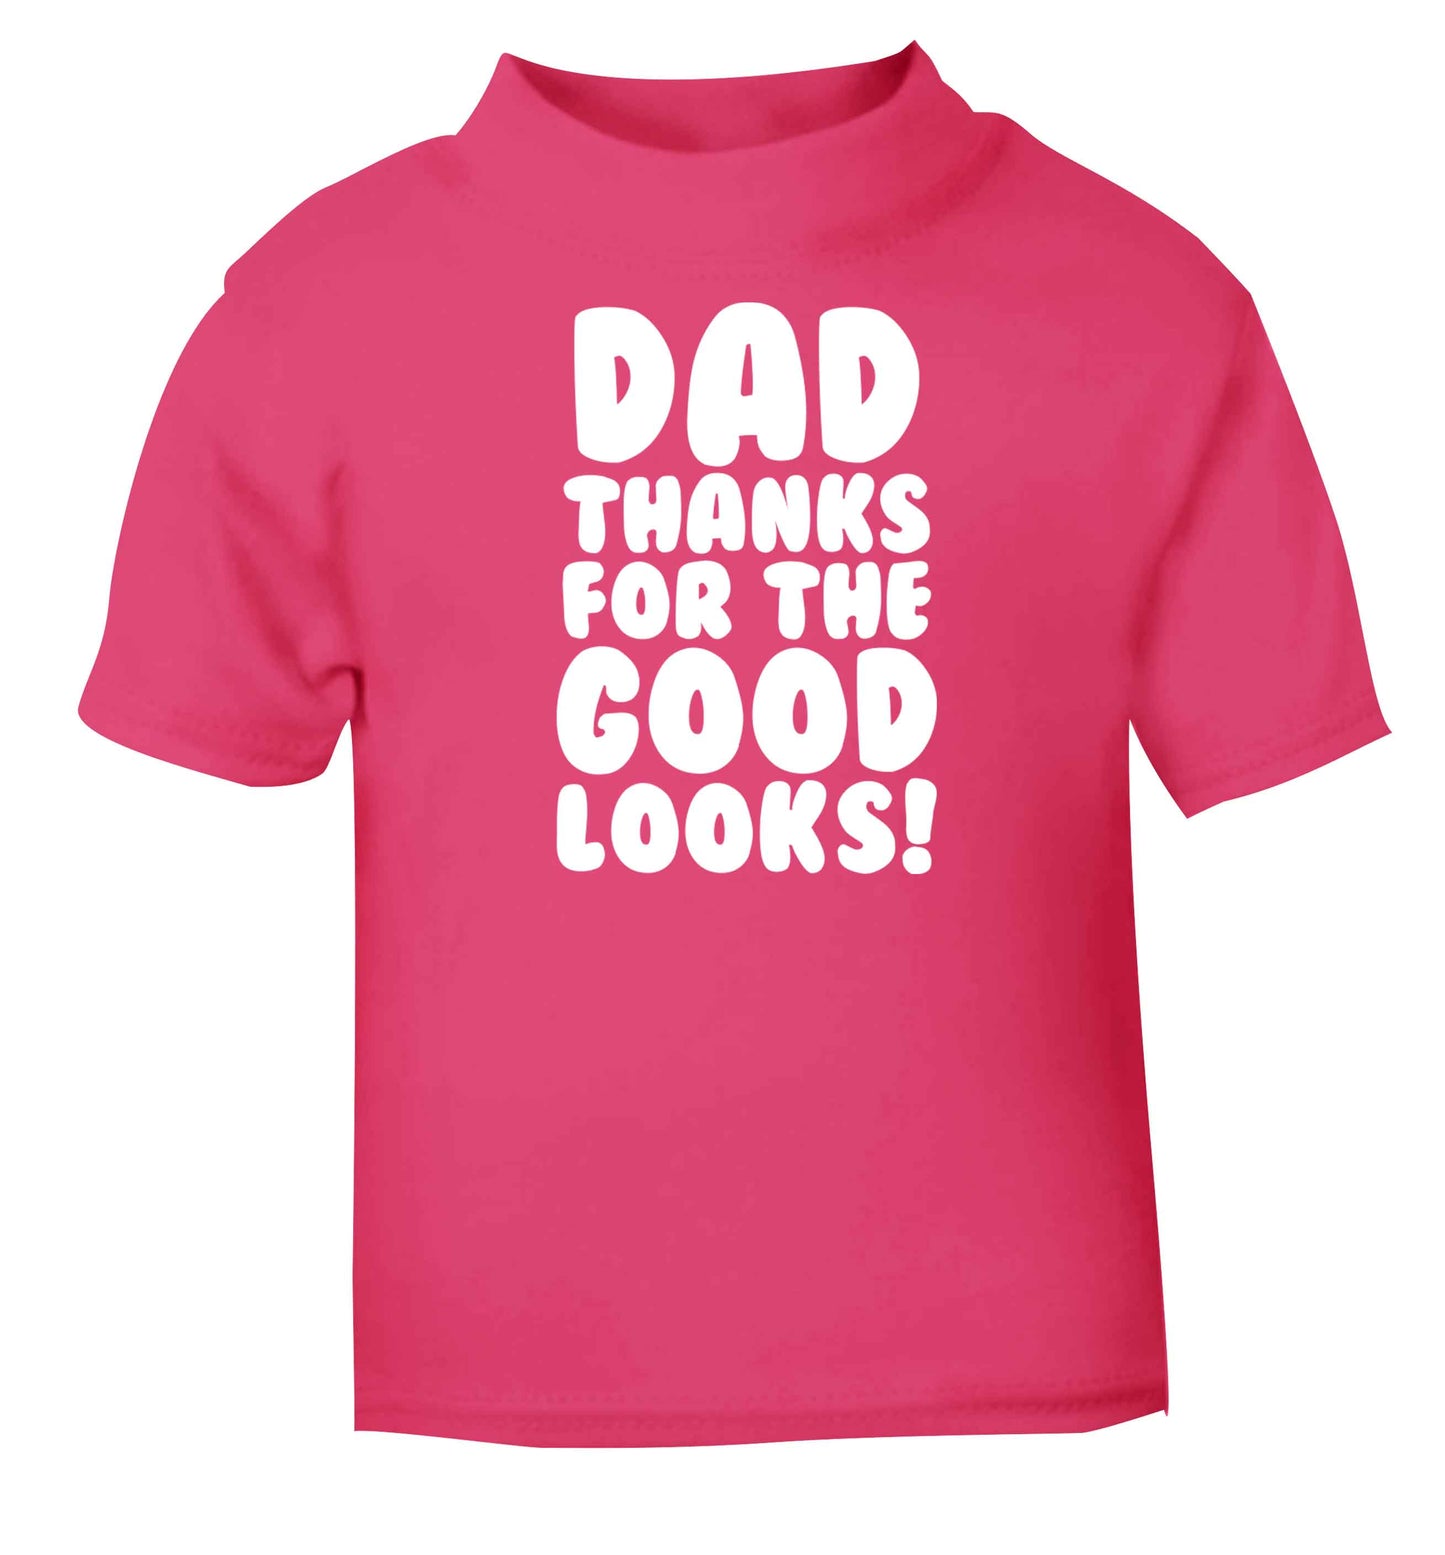 Dad thanks for the good looks pink baby toddler Tshirt 2 Years